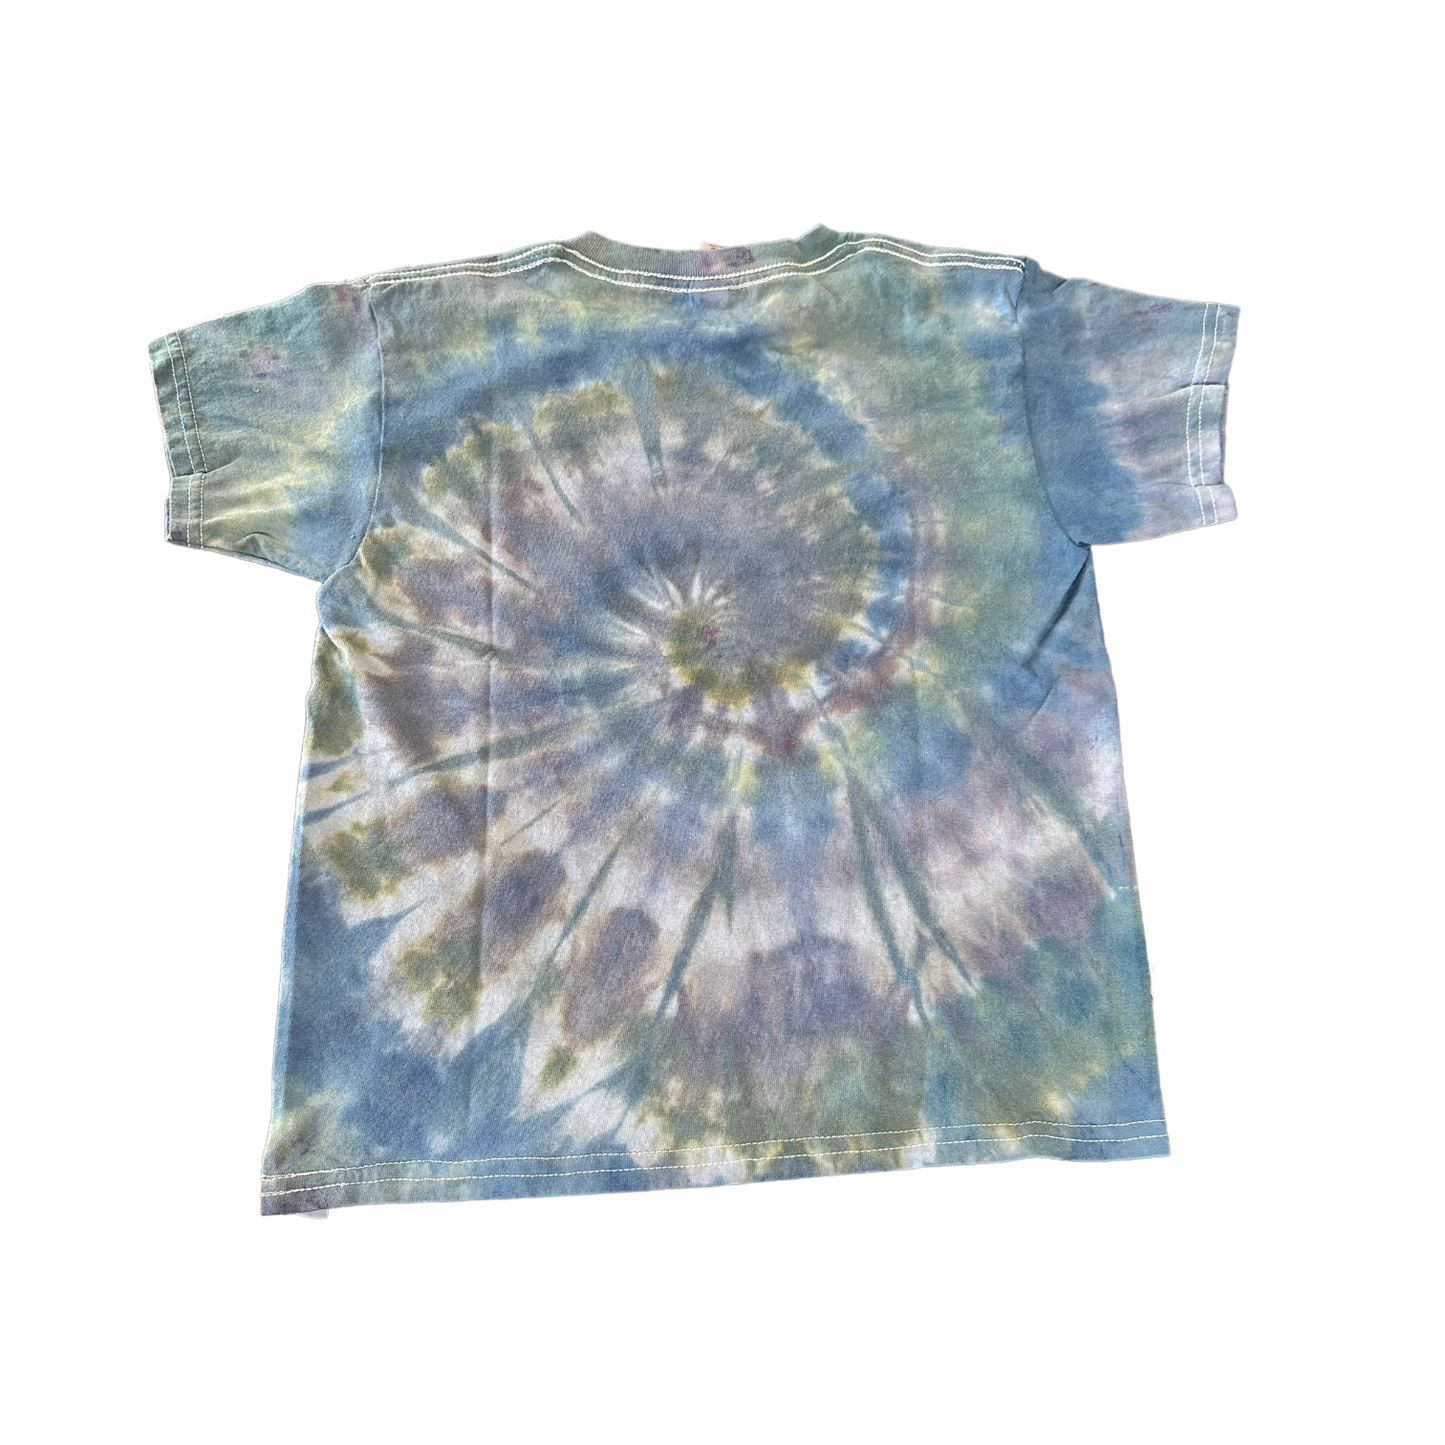 Youth Small Blue Forest Green and Dark Purple Spiral Ice Dye Tie Dye